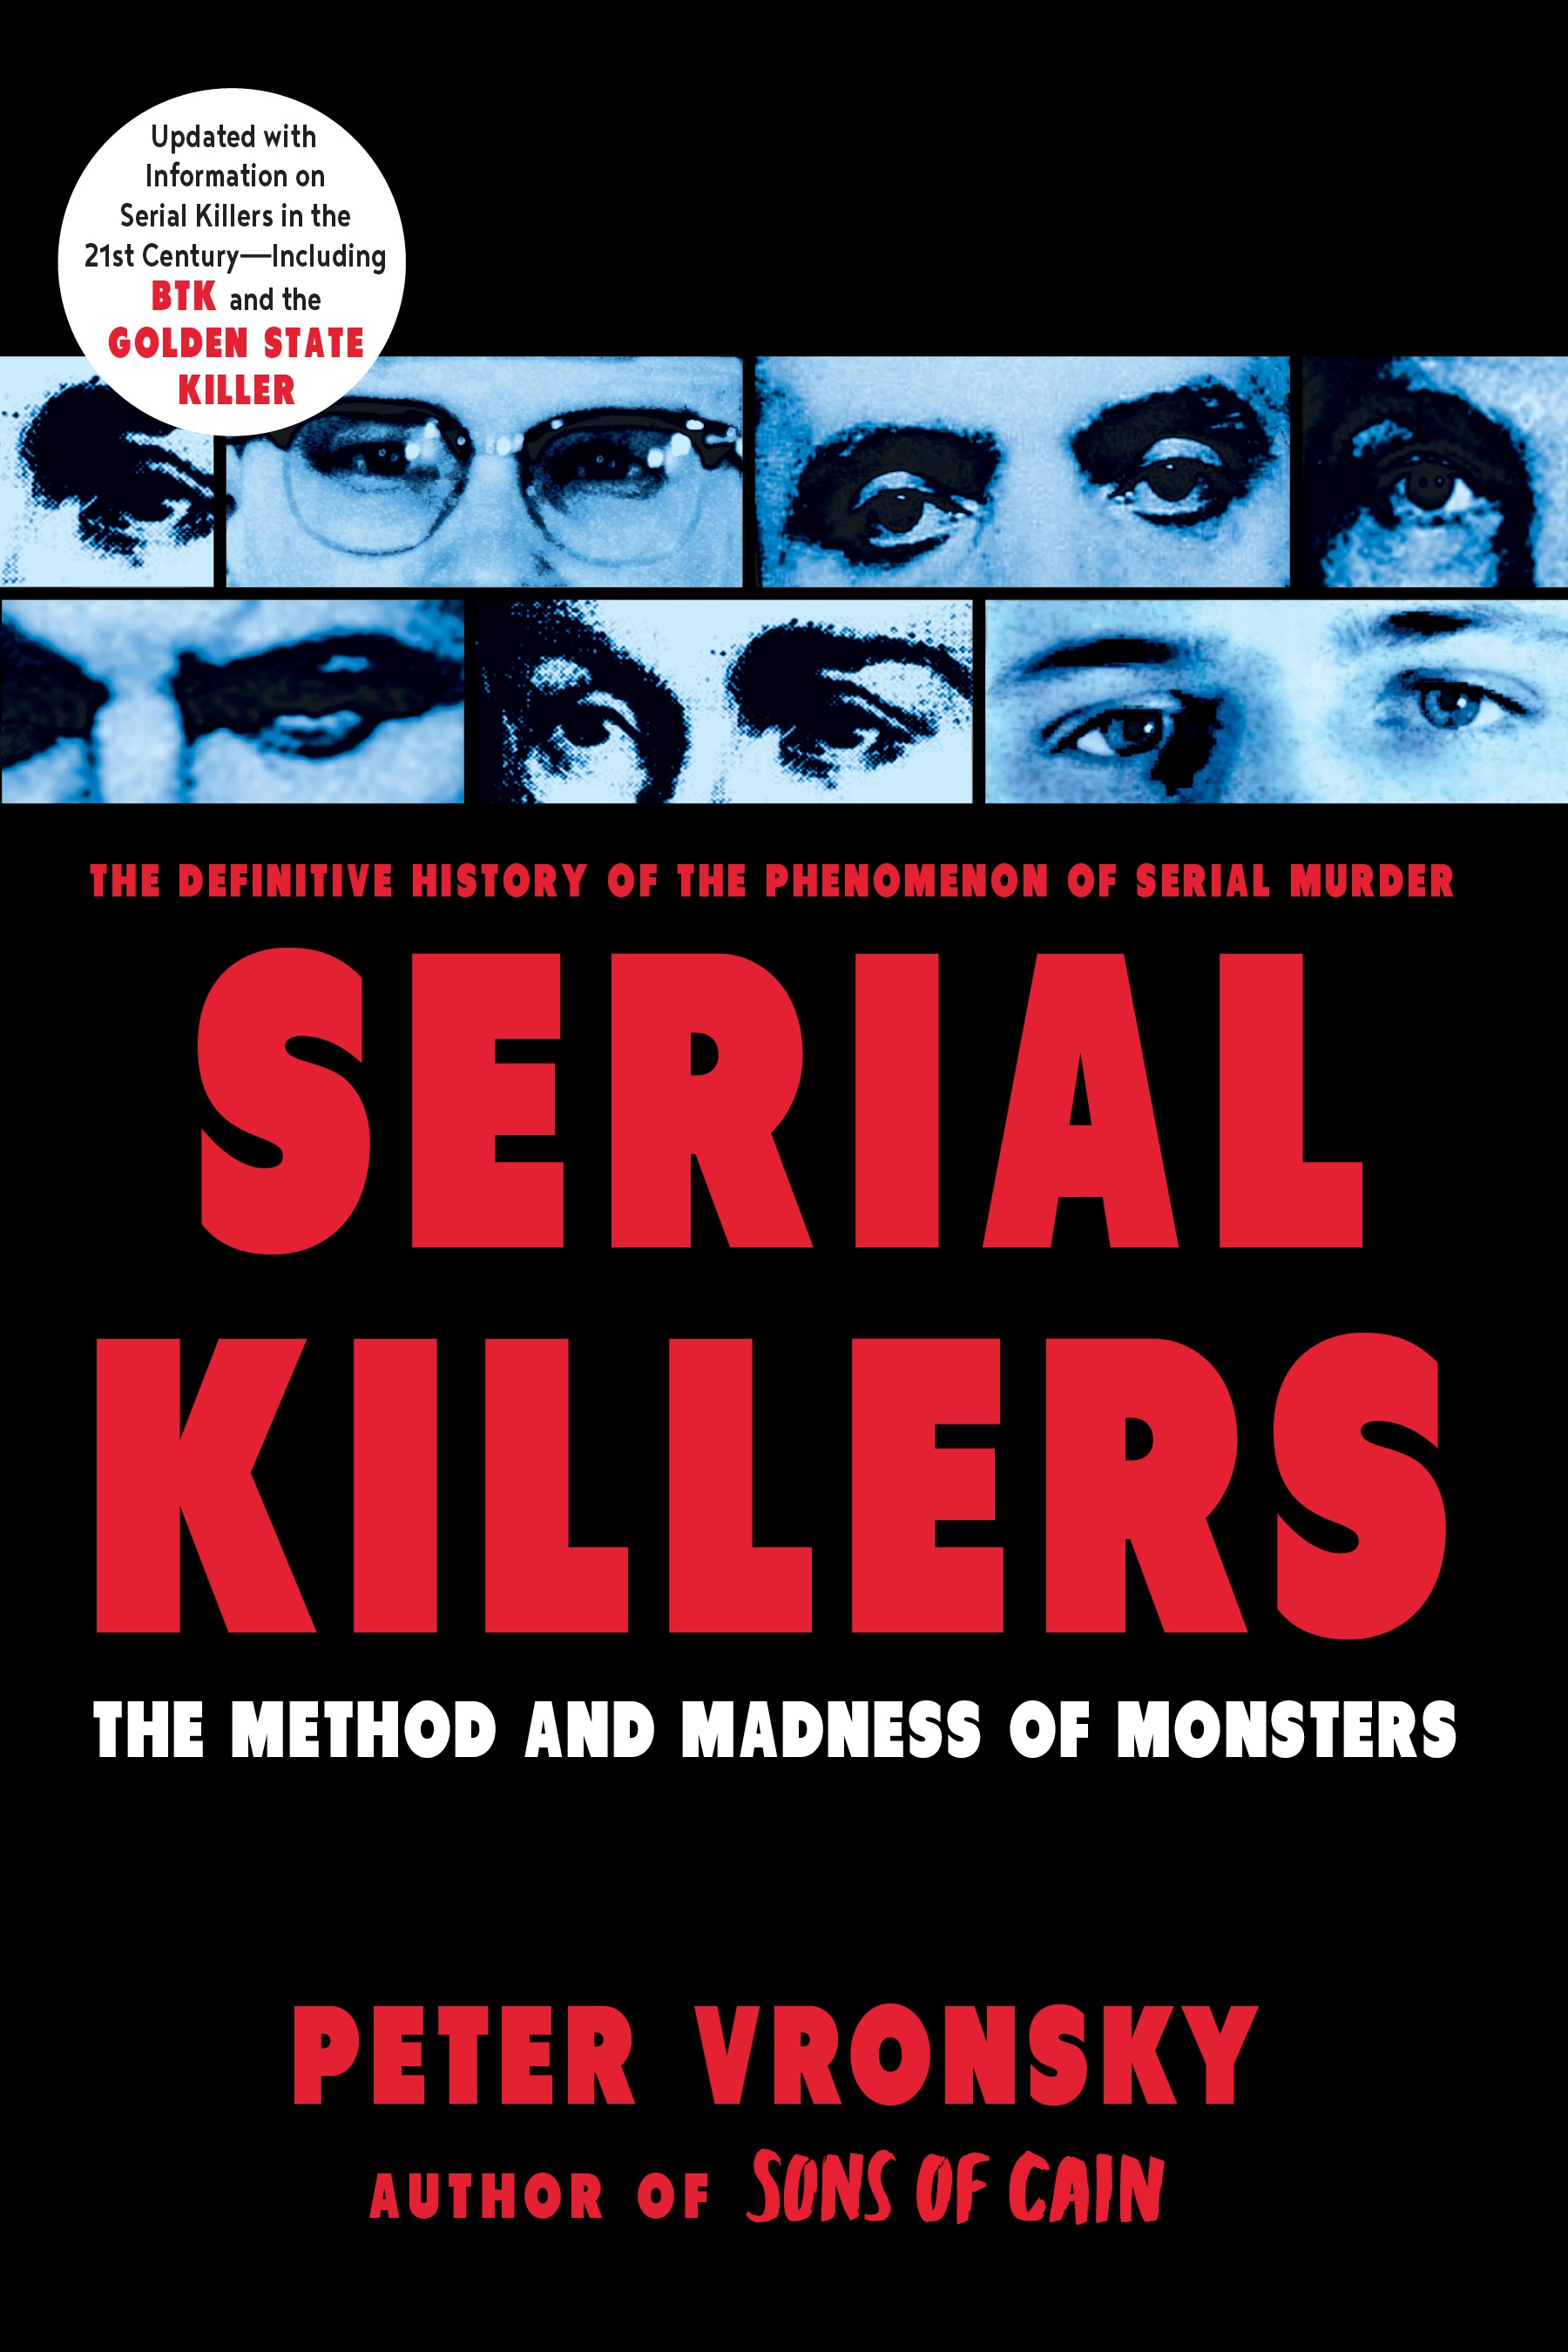 research studies about serial killers